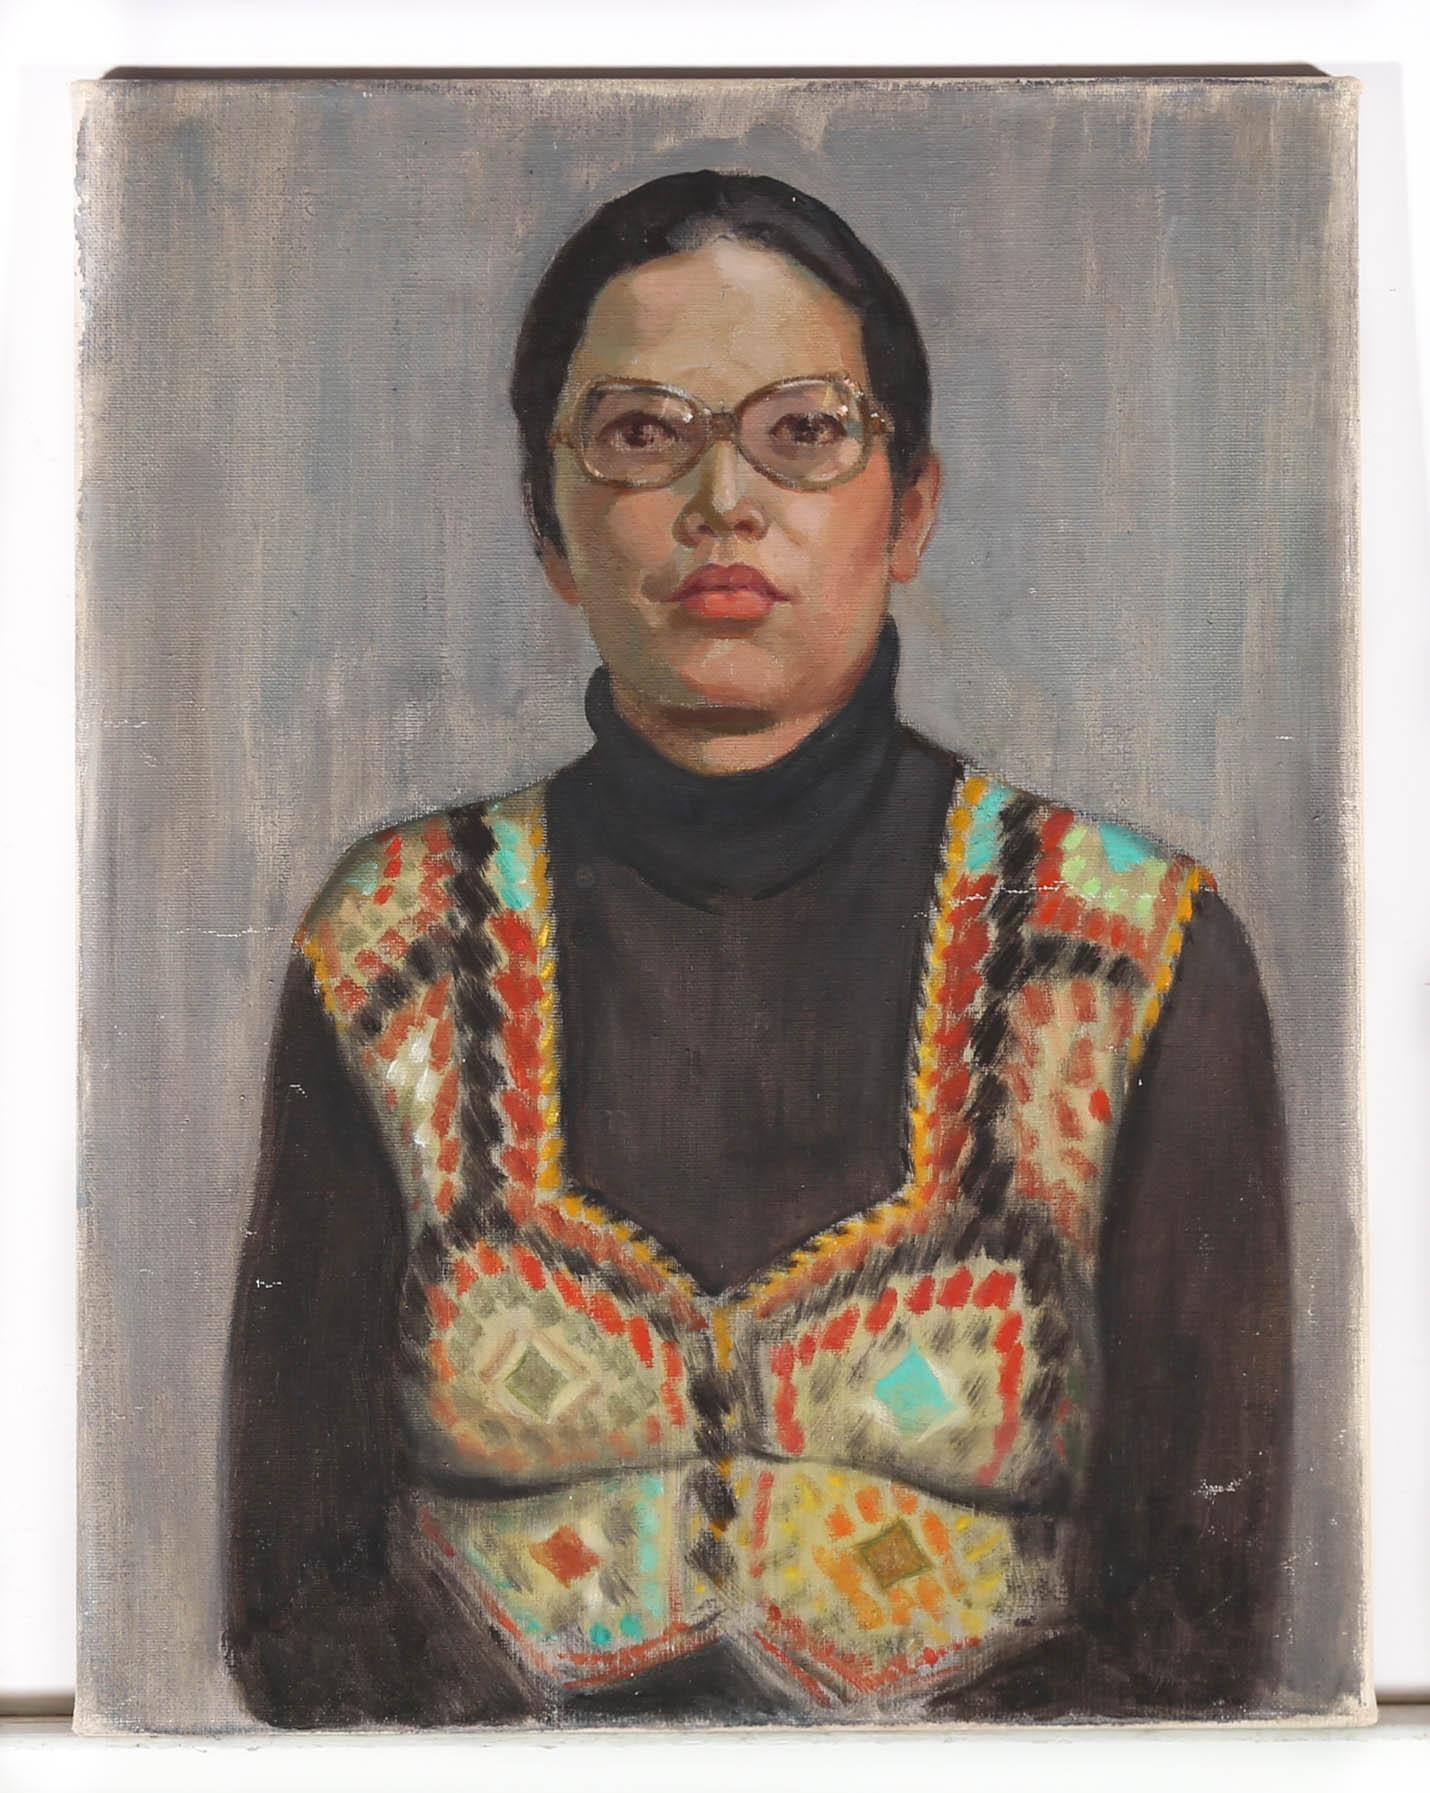 A striking Mid Century portrait of wonderful quality, showing a pretty young woman with glasses and a vibrant and eye catching crochet vest over a black jumper. In the style typical for this artist, the focus on textile pattern and colour add great